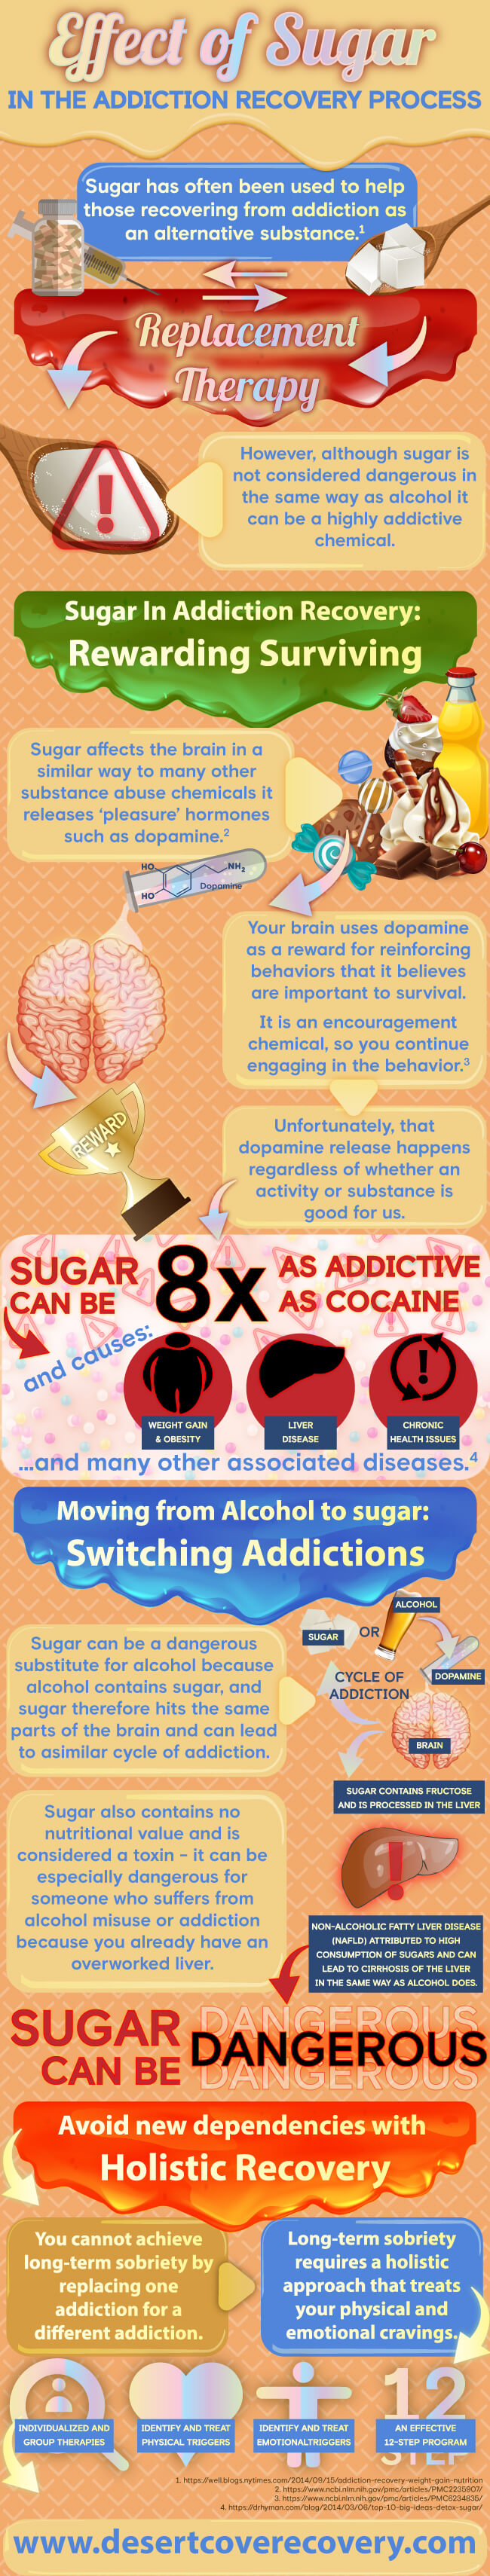 Effect of Sugar in Addiction Recovery Process